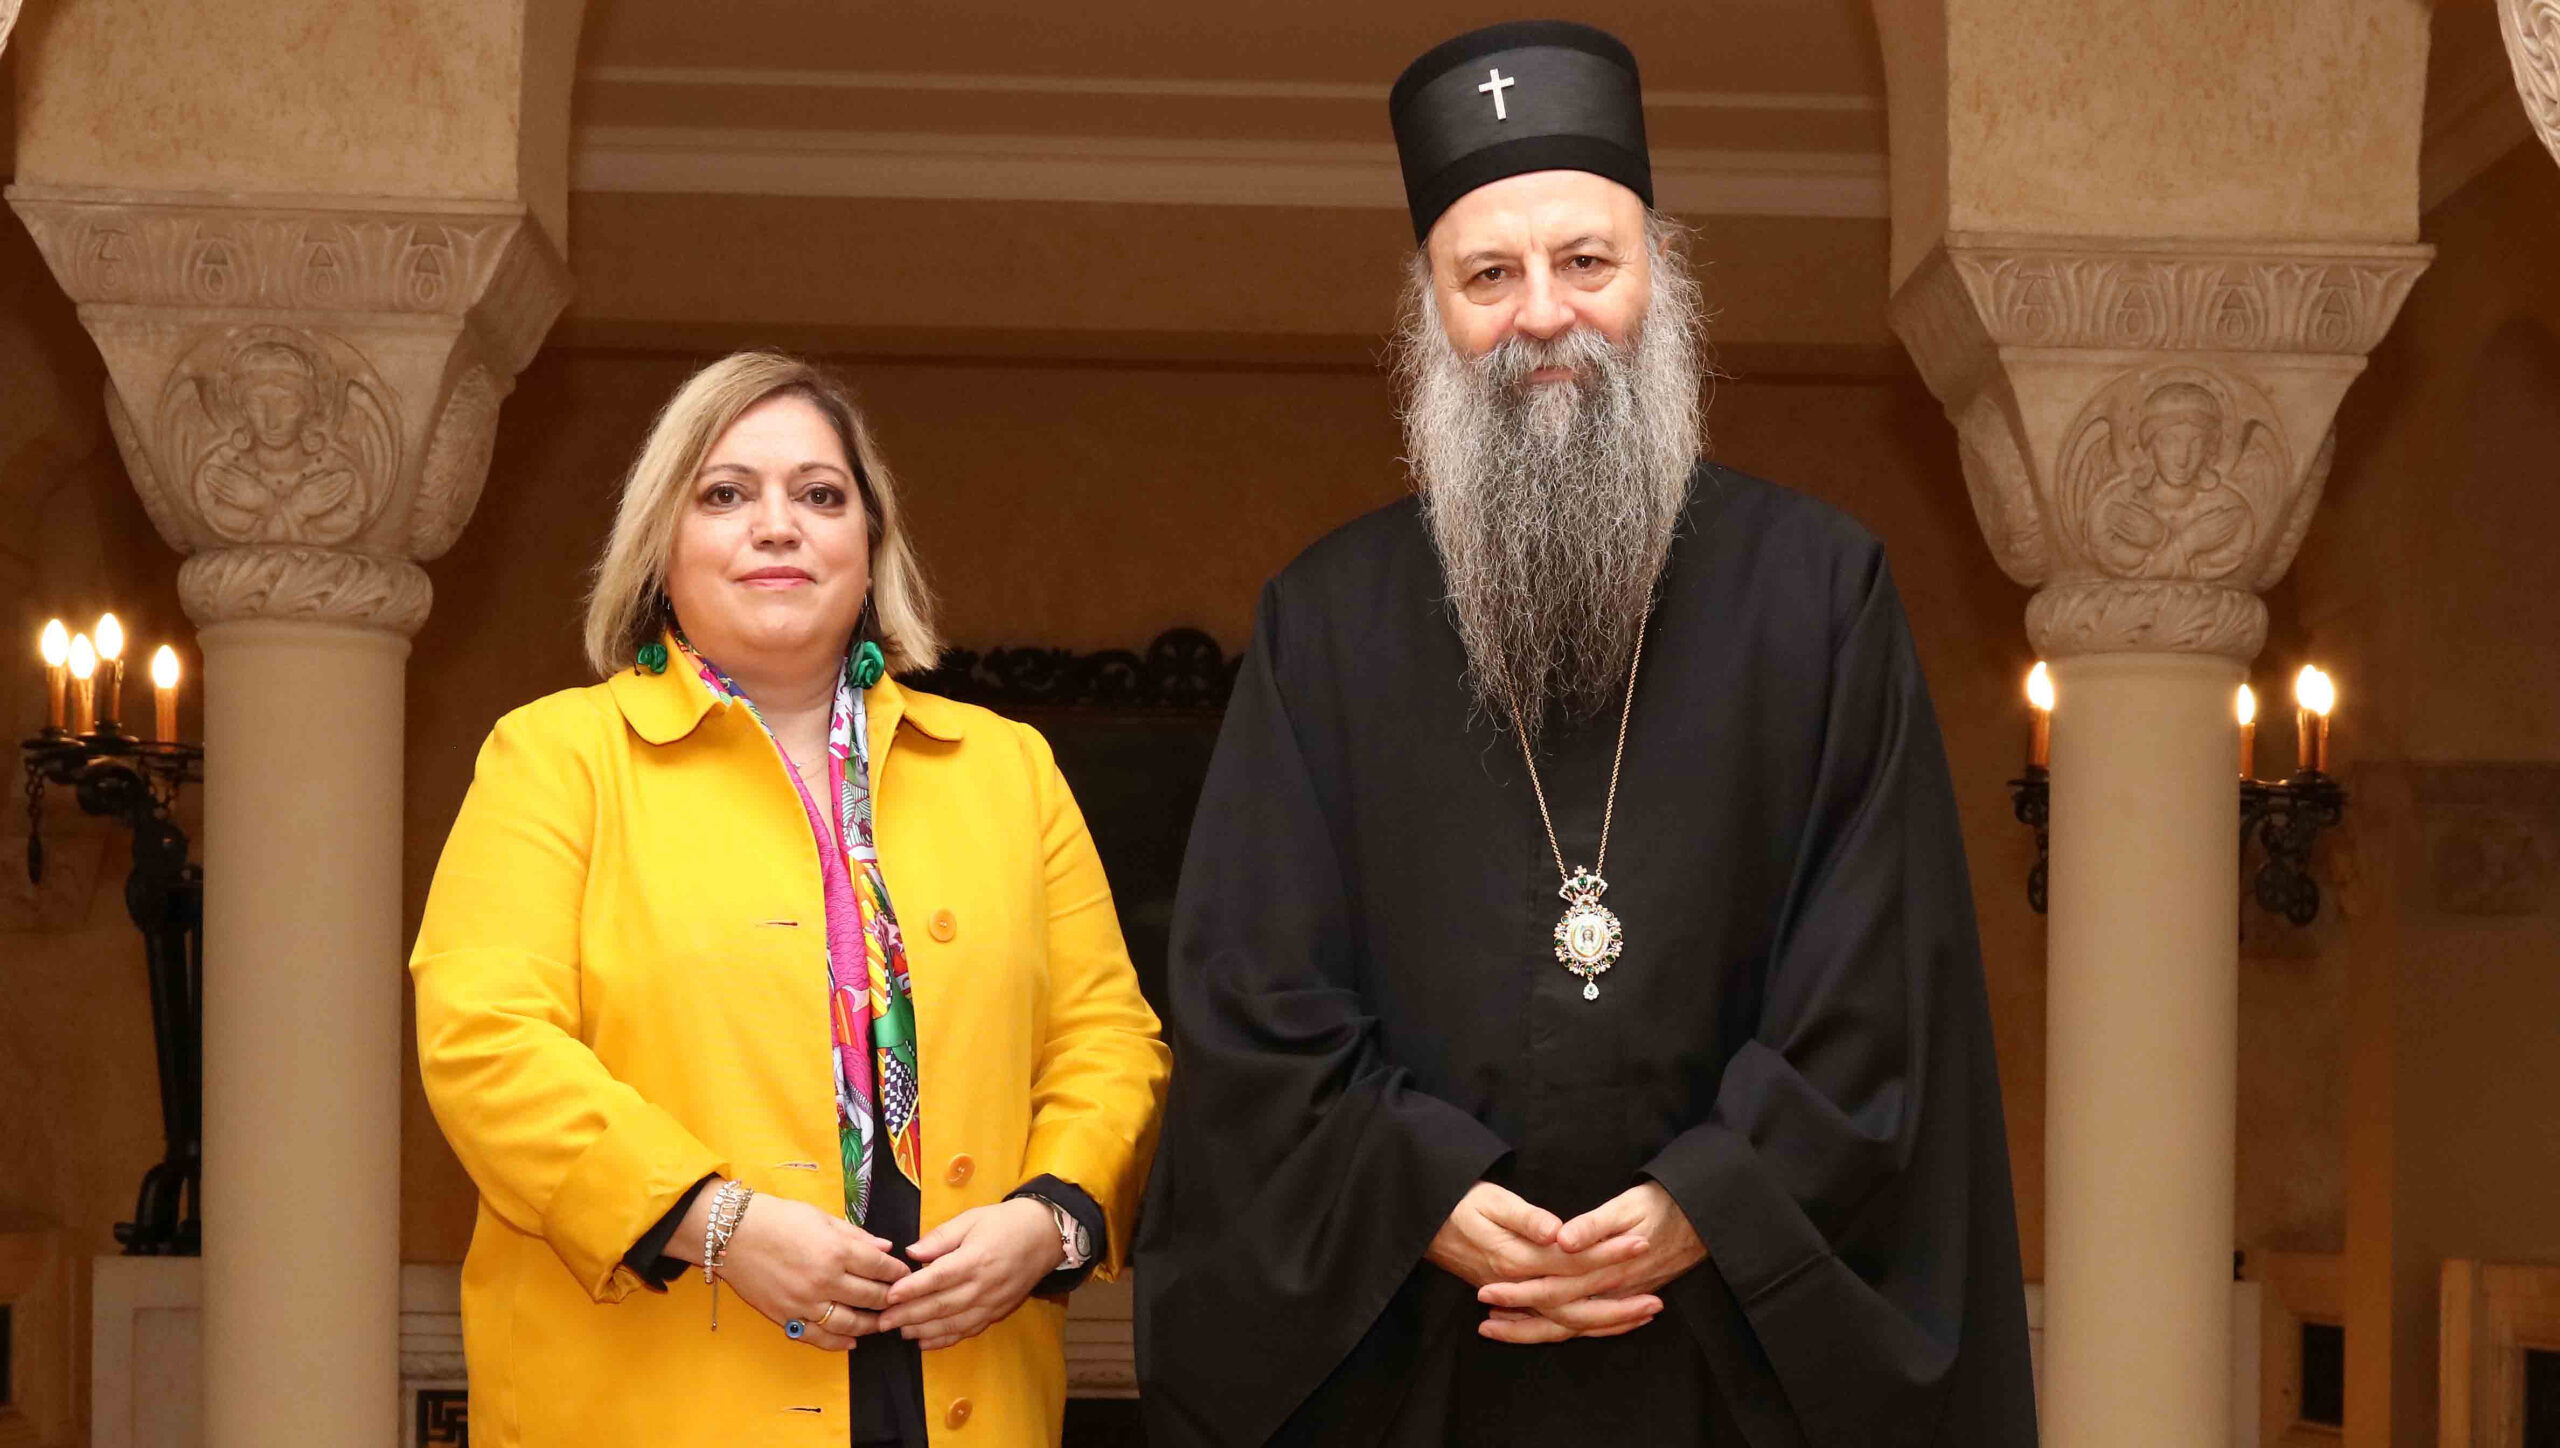 ‘Good Cooperation Between Two Nations is Based on Solid Foundations that are Strengthened in the Spirit of Mutual Understanding’ – Patriarch Porfirije of Serbia